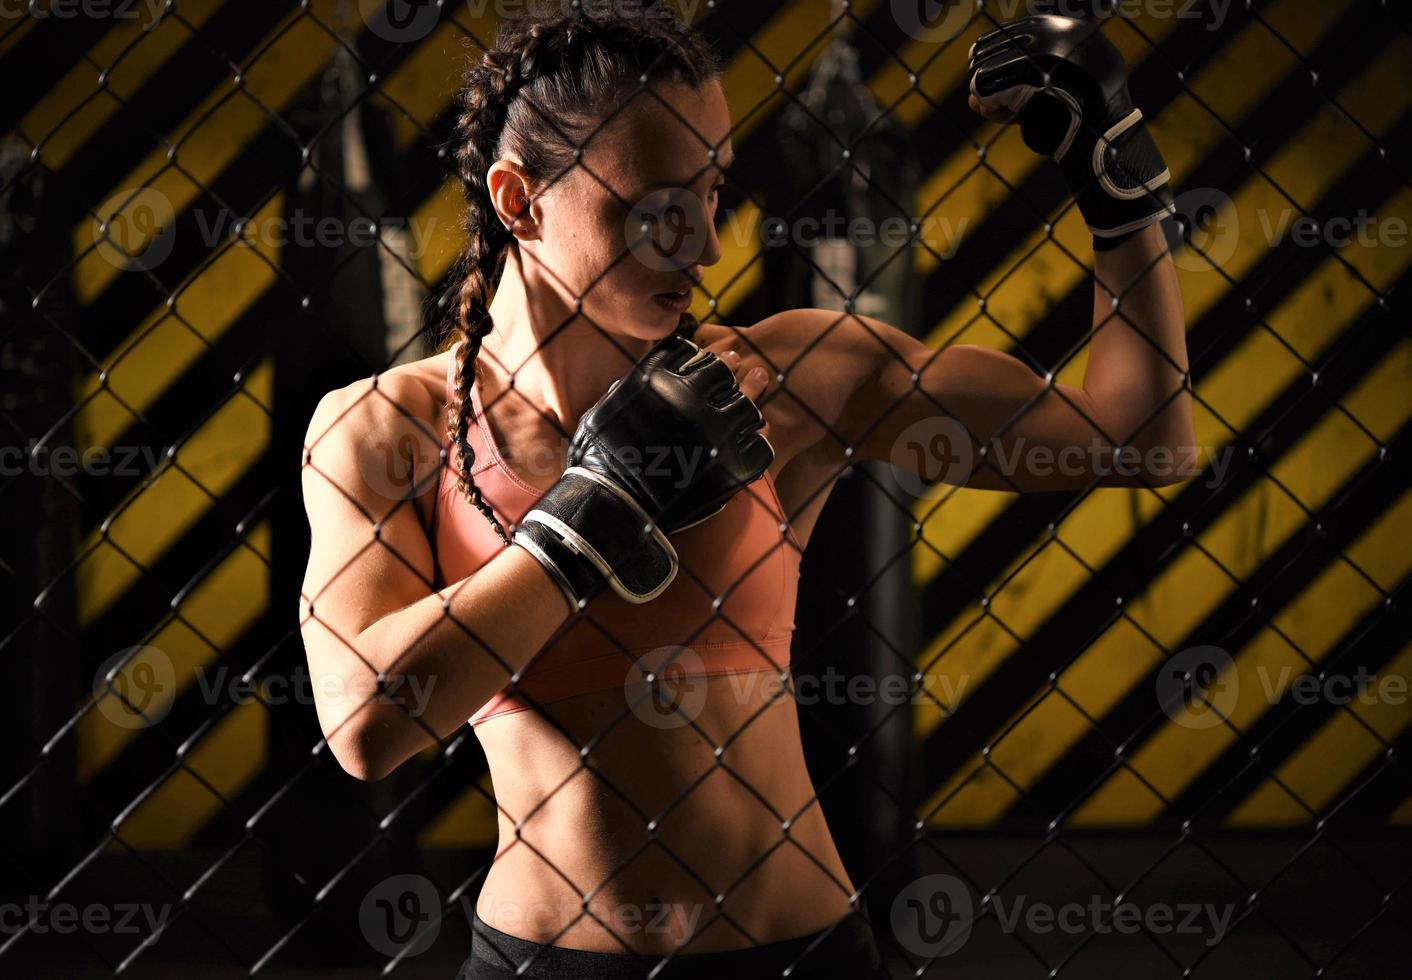 A female trainee of mixed martial arts wearing a hand wrap warms up within the ring cage by stretching her back and legs. photo